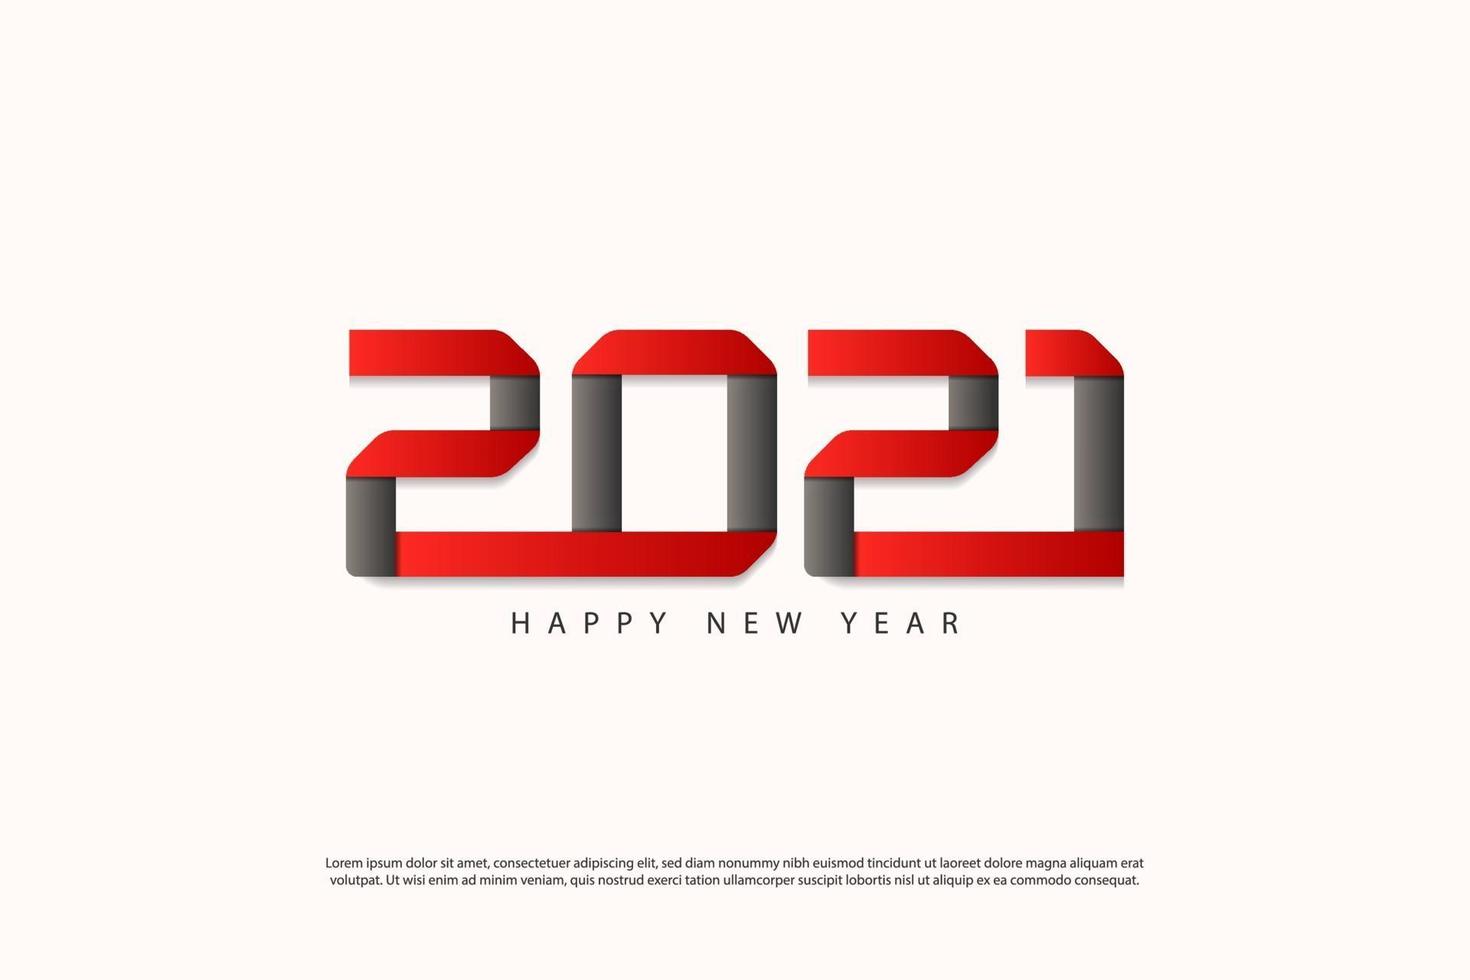 Creative 2021 Happy New Year design template for greeting cards, poster, Banner, Vector illustration. Isolated on White background.